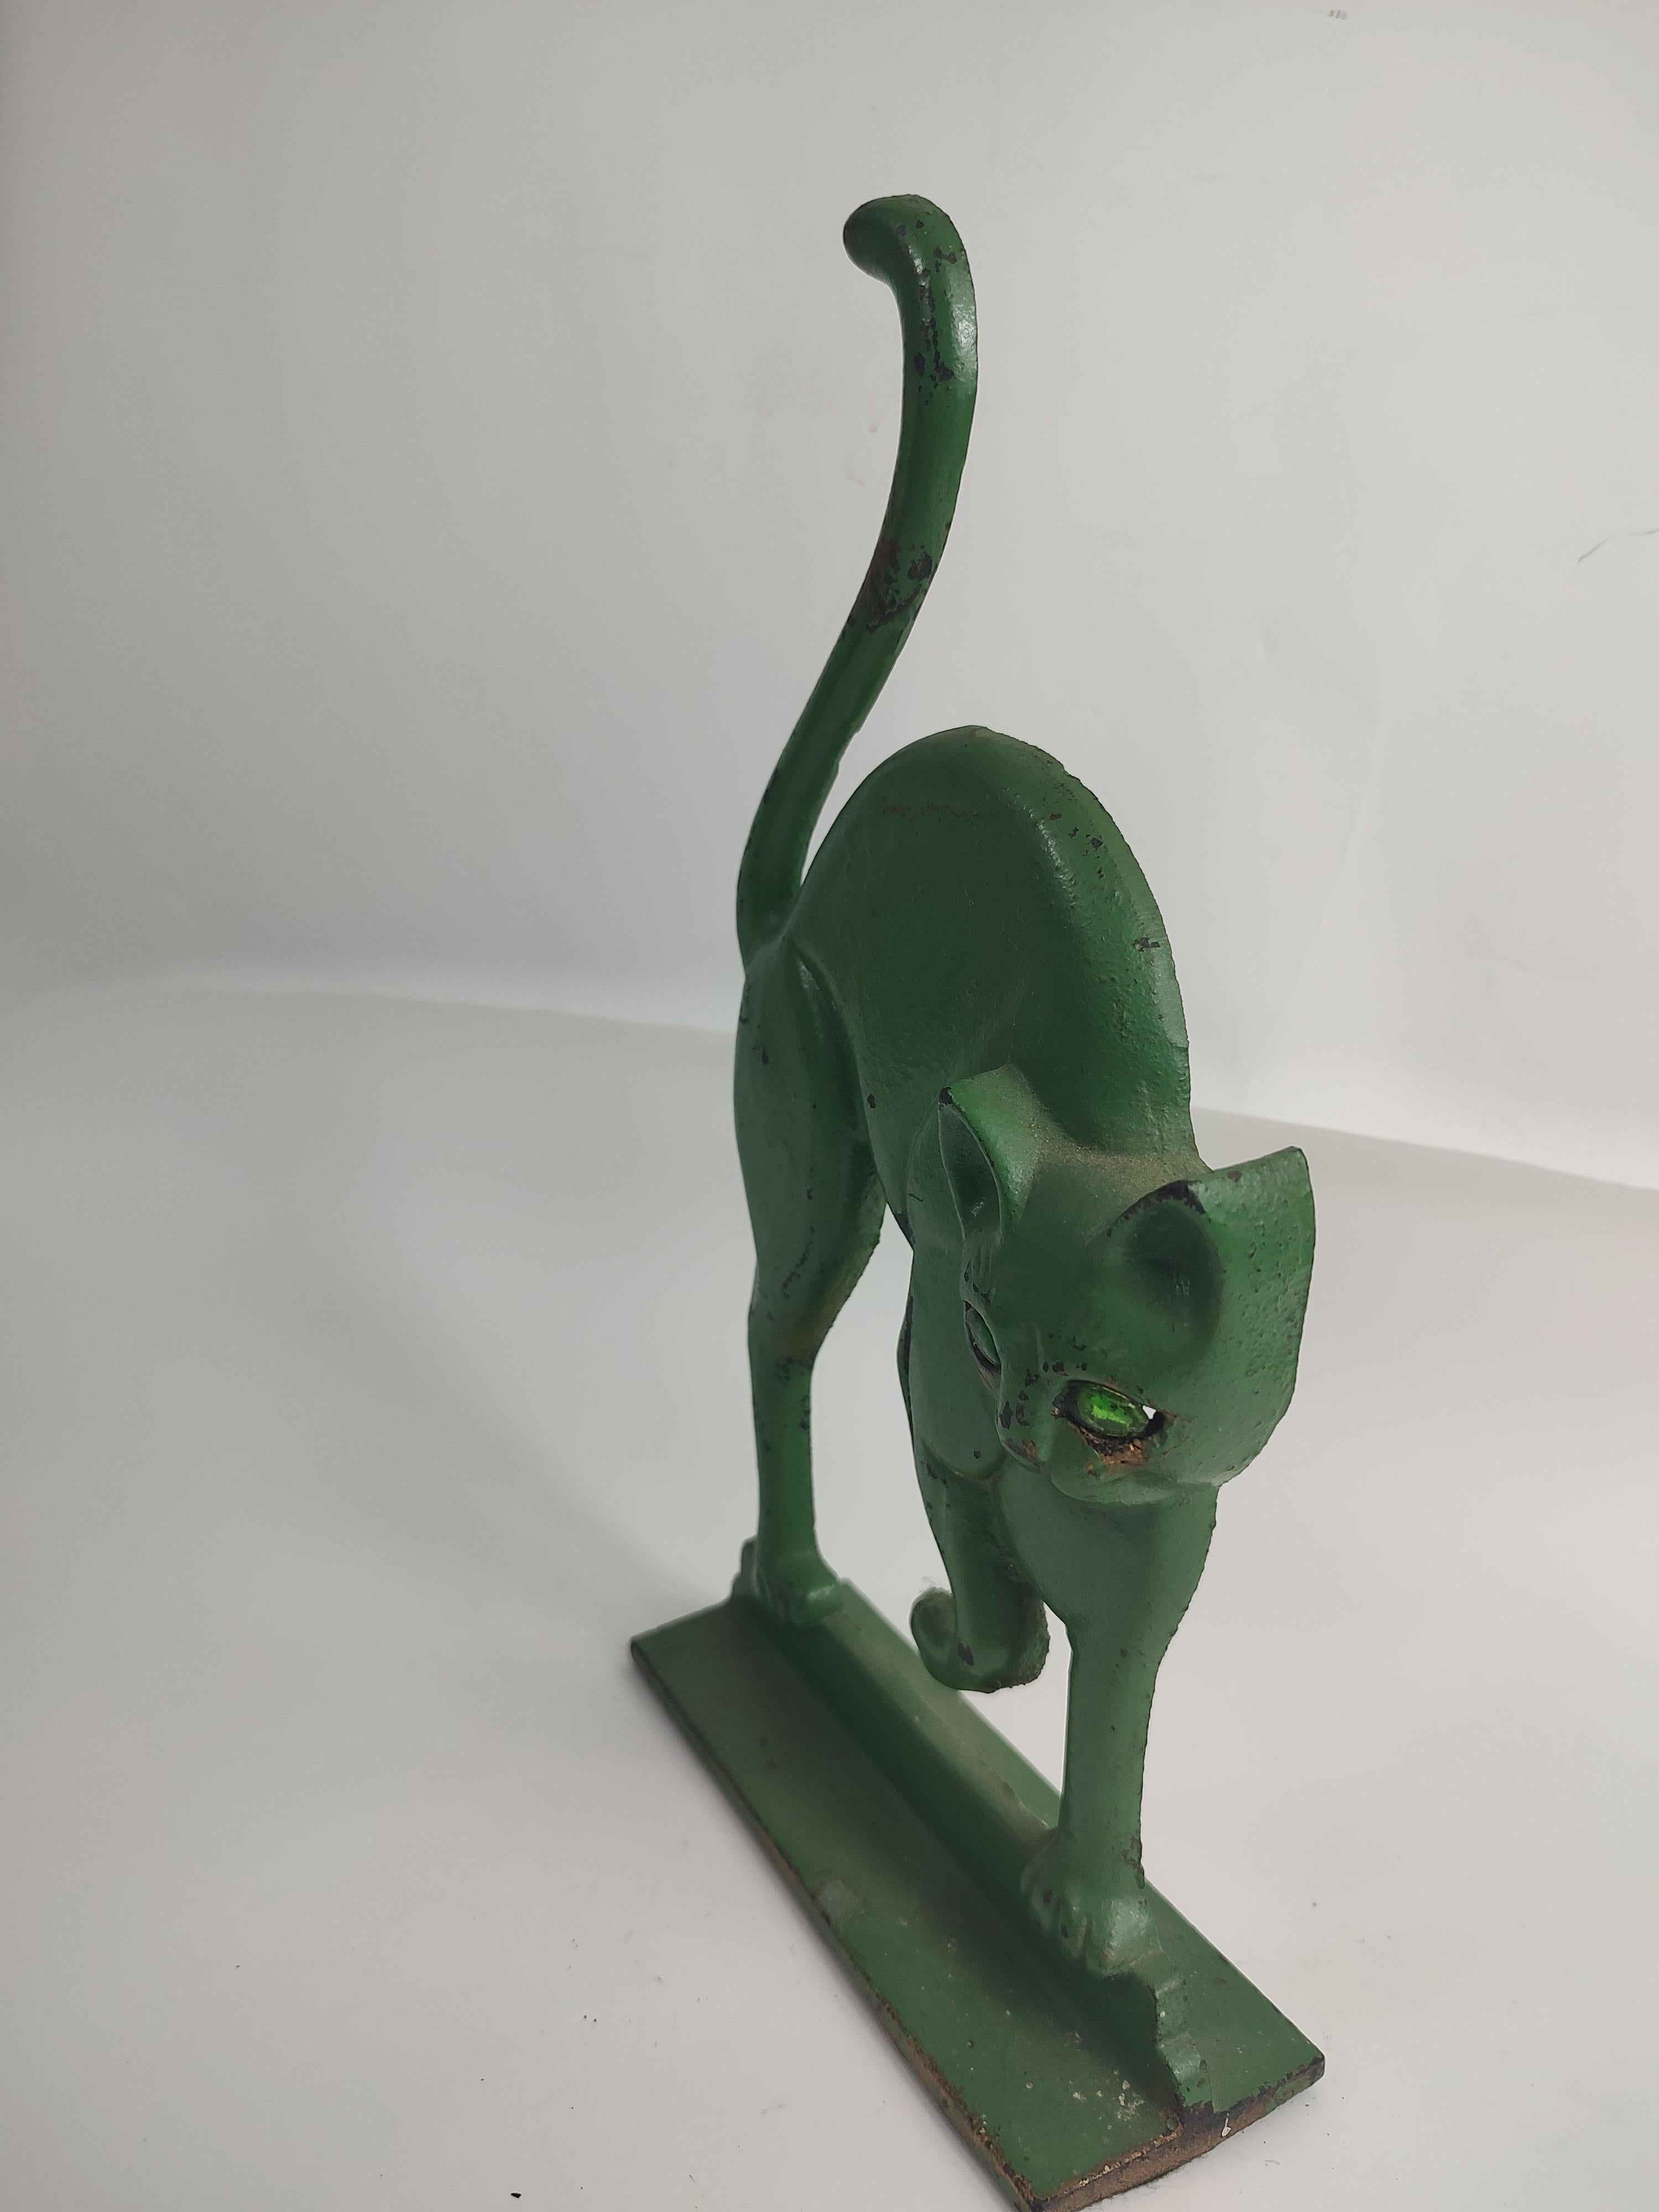 Industrial Midcentury Arched Cat with Glass Eyes Doorstop in Old Green Paint